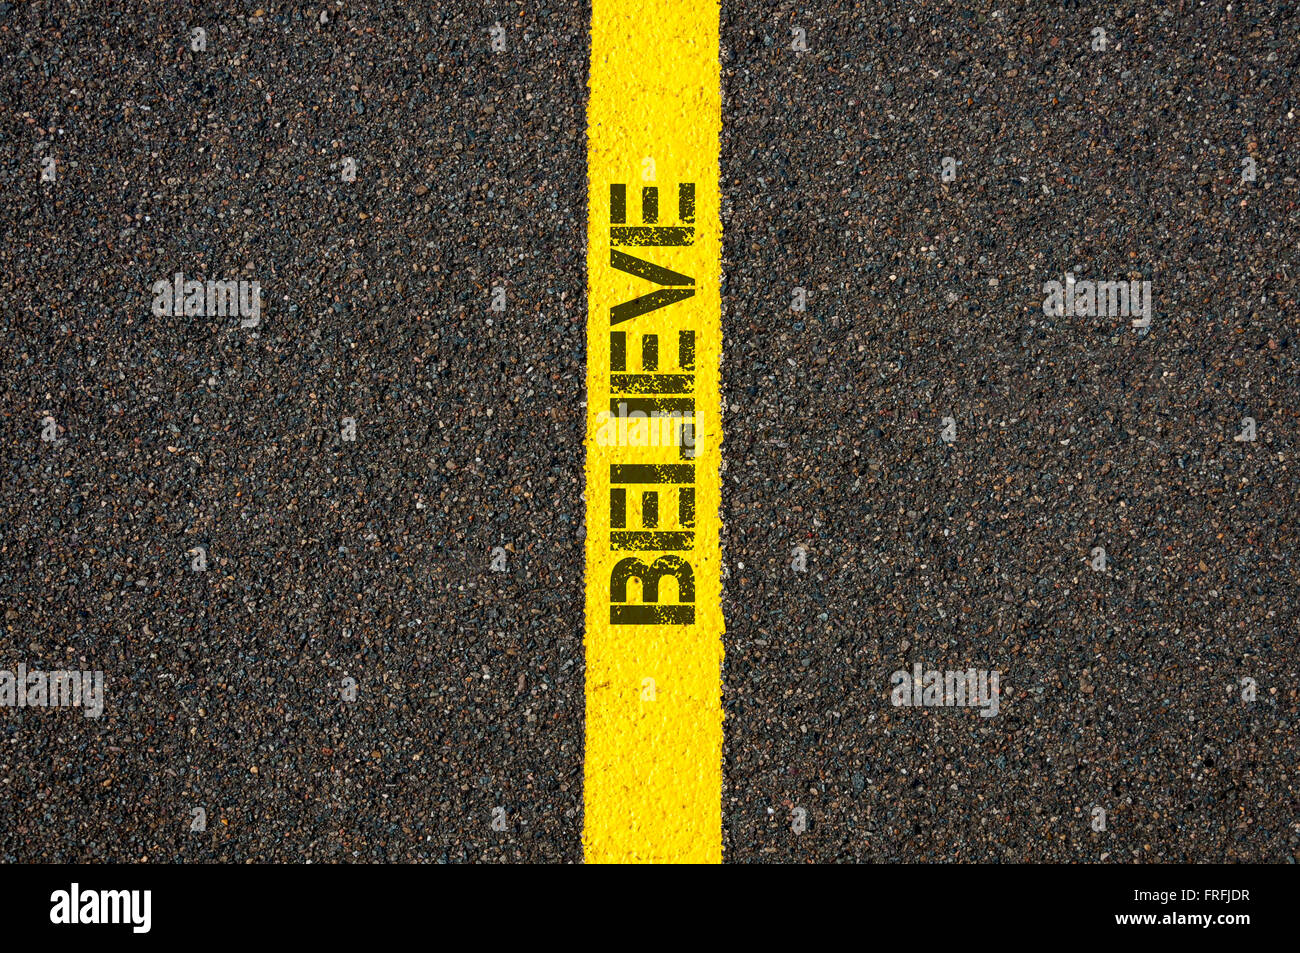 Road marking yellow paint dividing line with word BELIEVE, concept image Stock Photo